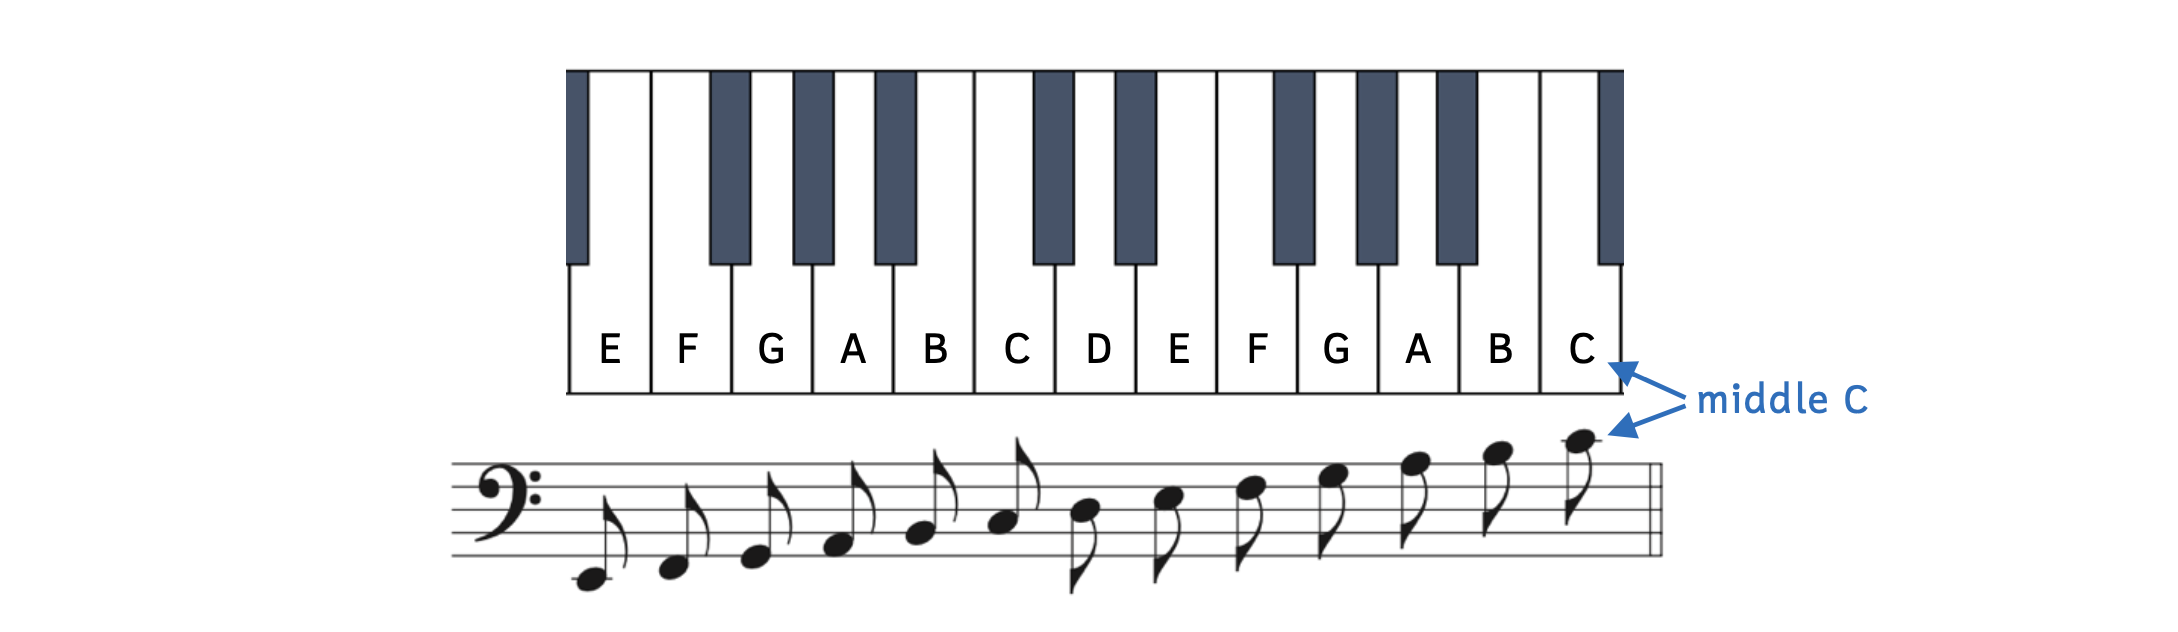 Pitches in the bass clef shown on a keyboard. The keyboard has notes written in ascending order beginning with E. They are E, F, G, A, B, C, D, E, F, G, A, B, and C. The staff below the key shows that E is the ledger line below the staff. Eighth notes are shown with stems pointing up with a flag to the right until the middle line, which is D. At this point, the stems point down but the flat is still to the right. The pitches ascend until middle C, which is written on the ledger line above the staff.